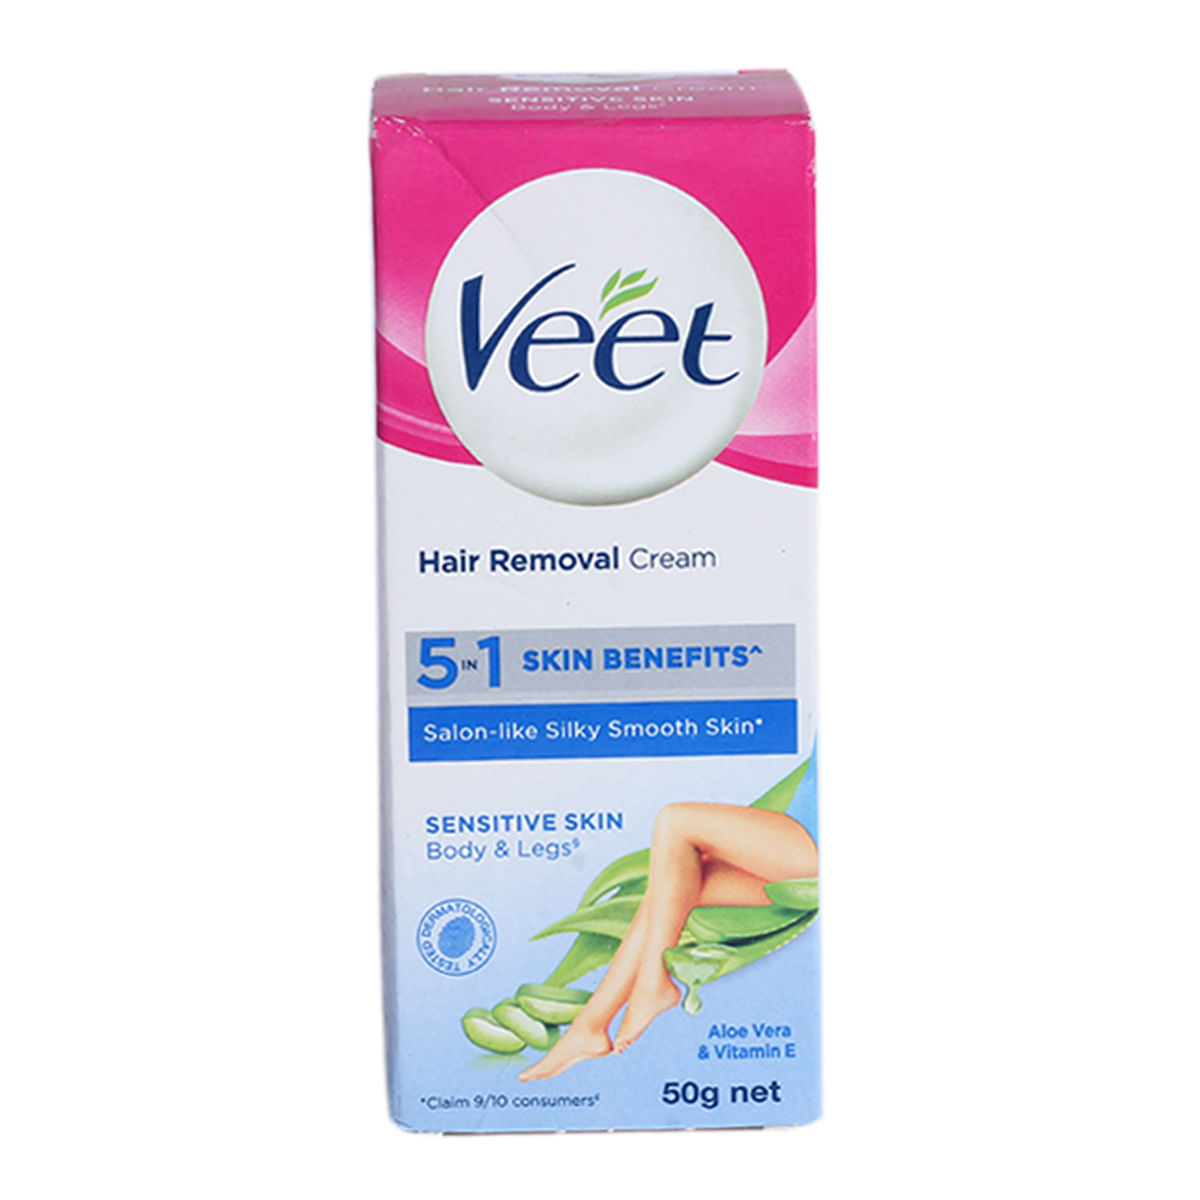 Veet 5 in 1 Skin Benefits Hair Removal Cream For Sensitive Skin, 25 gm  Price, Uses, Side Effects, Composition - Apollo Pharmacy